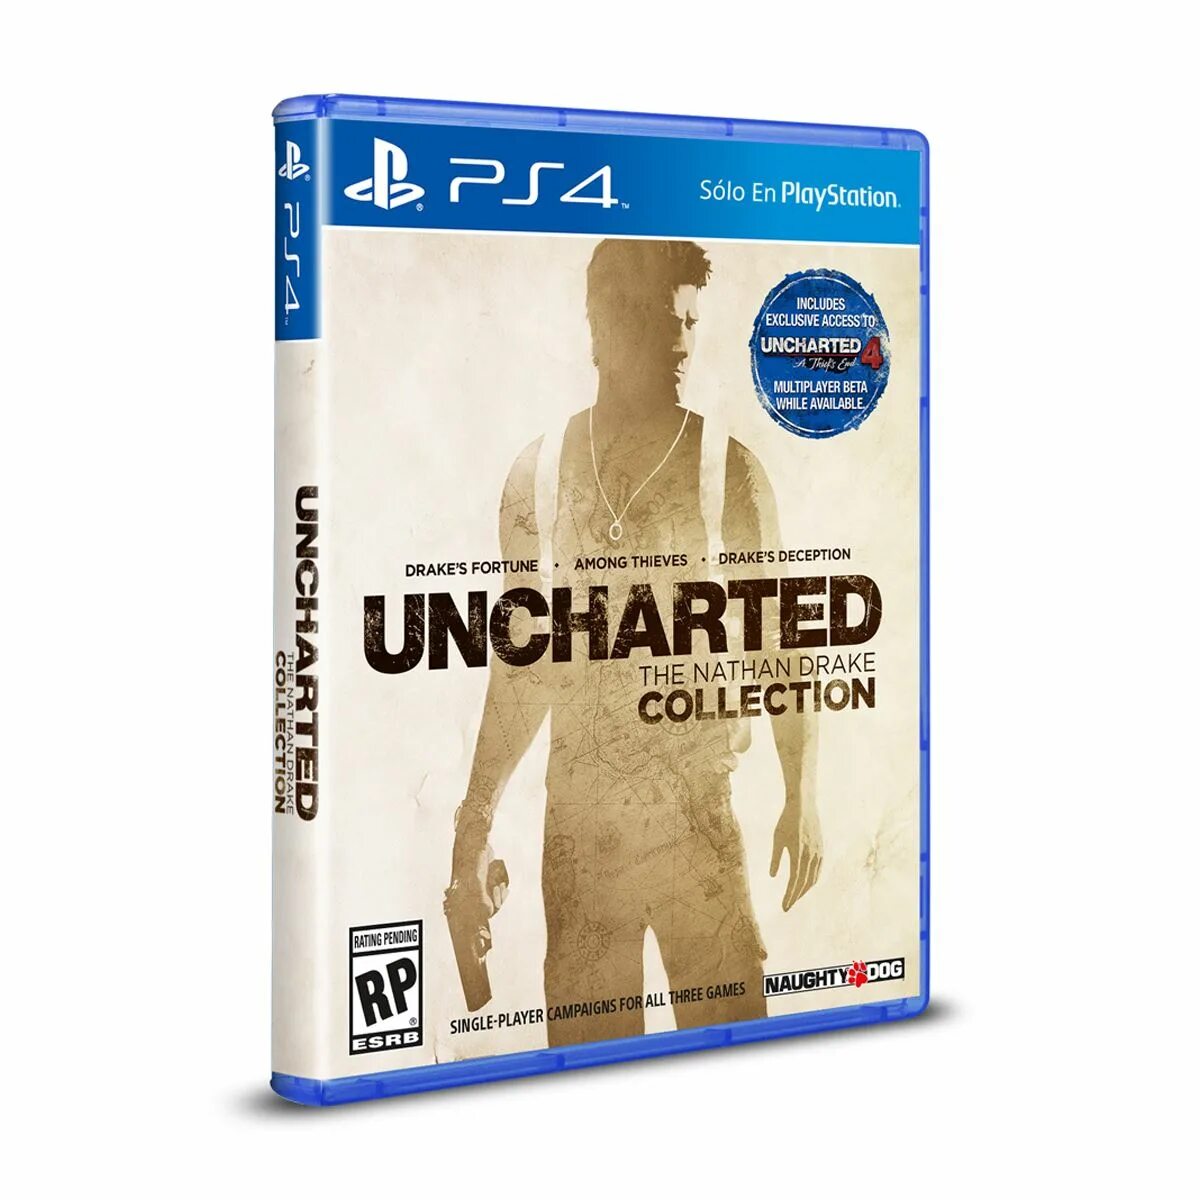 Игра uncharted collection. Uncharted collection ps4. Uncharted Nathan Drake collection ps4. Uncharted Trilogy ps4. Uncharted трилогия.